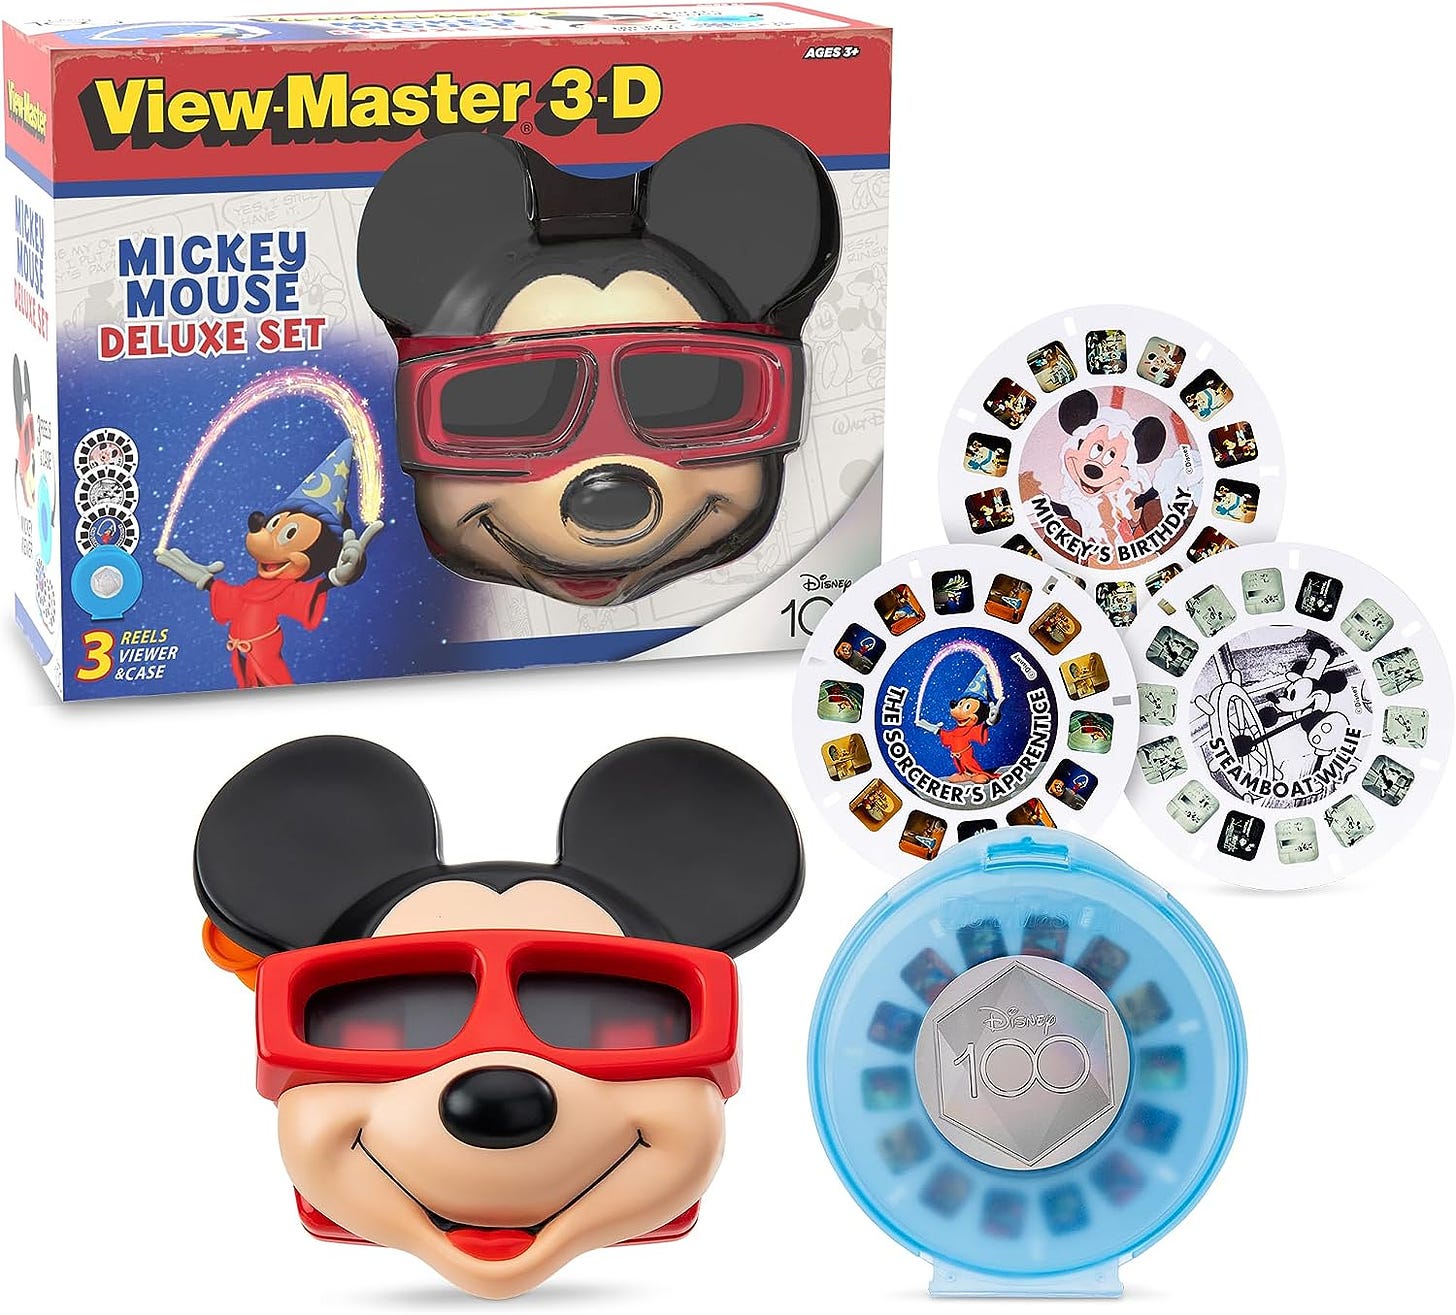 Classic 3D photo viewer the View-Master brought back to life using VR